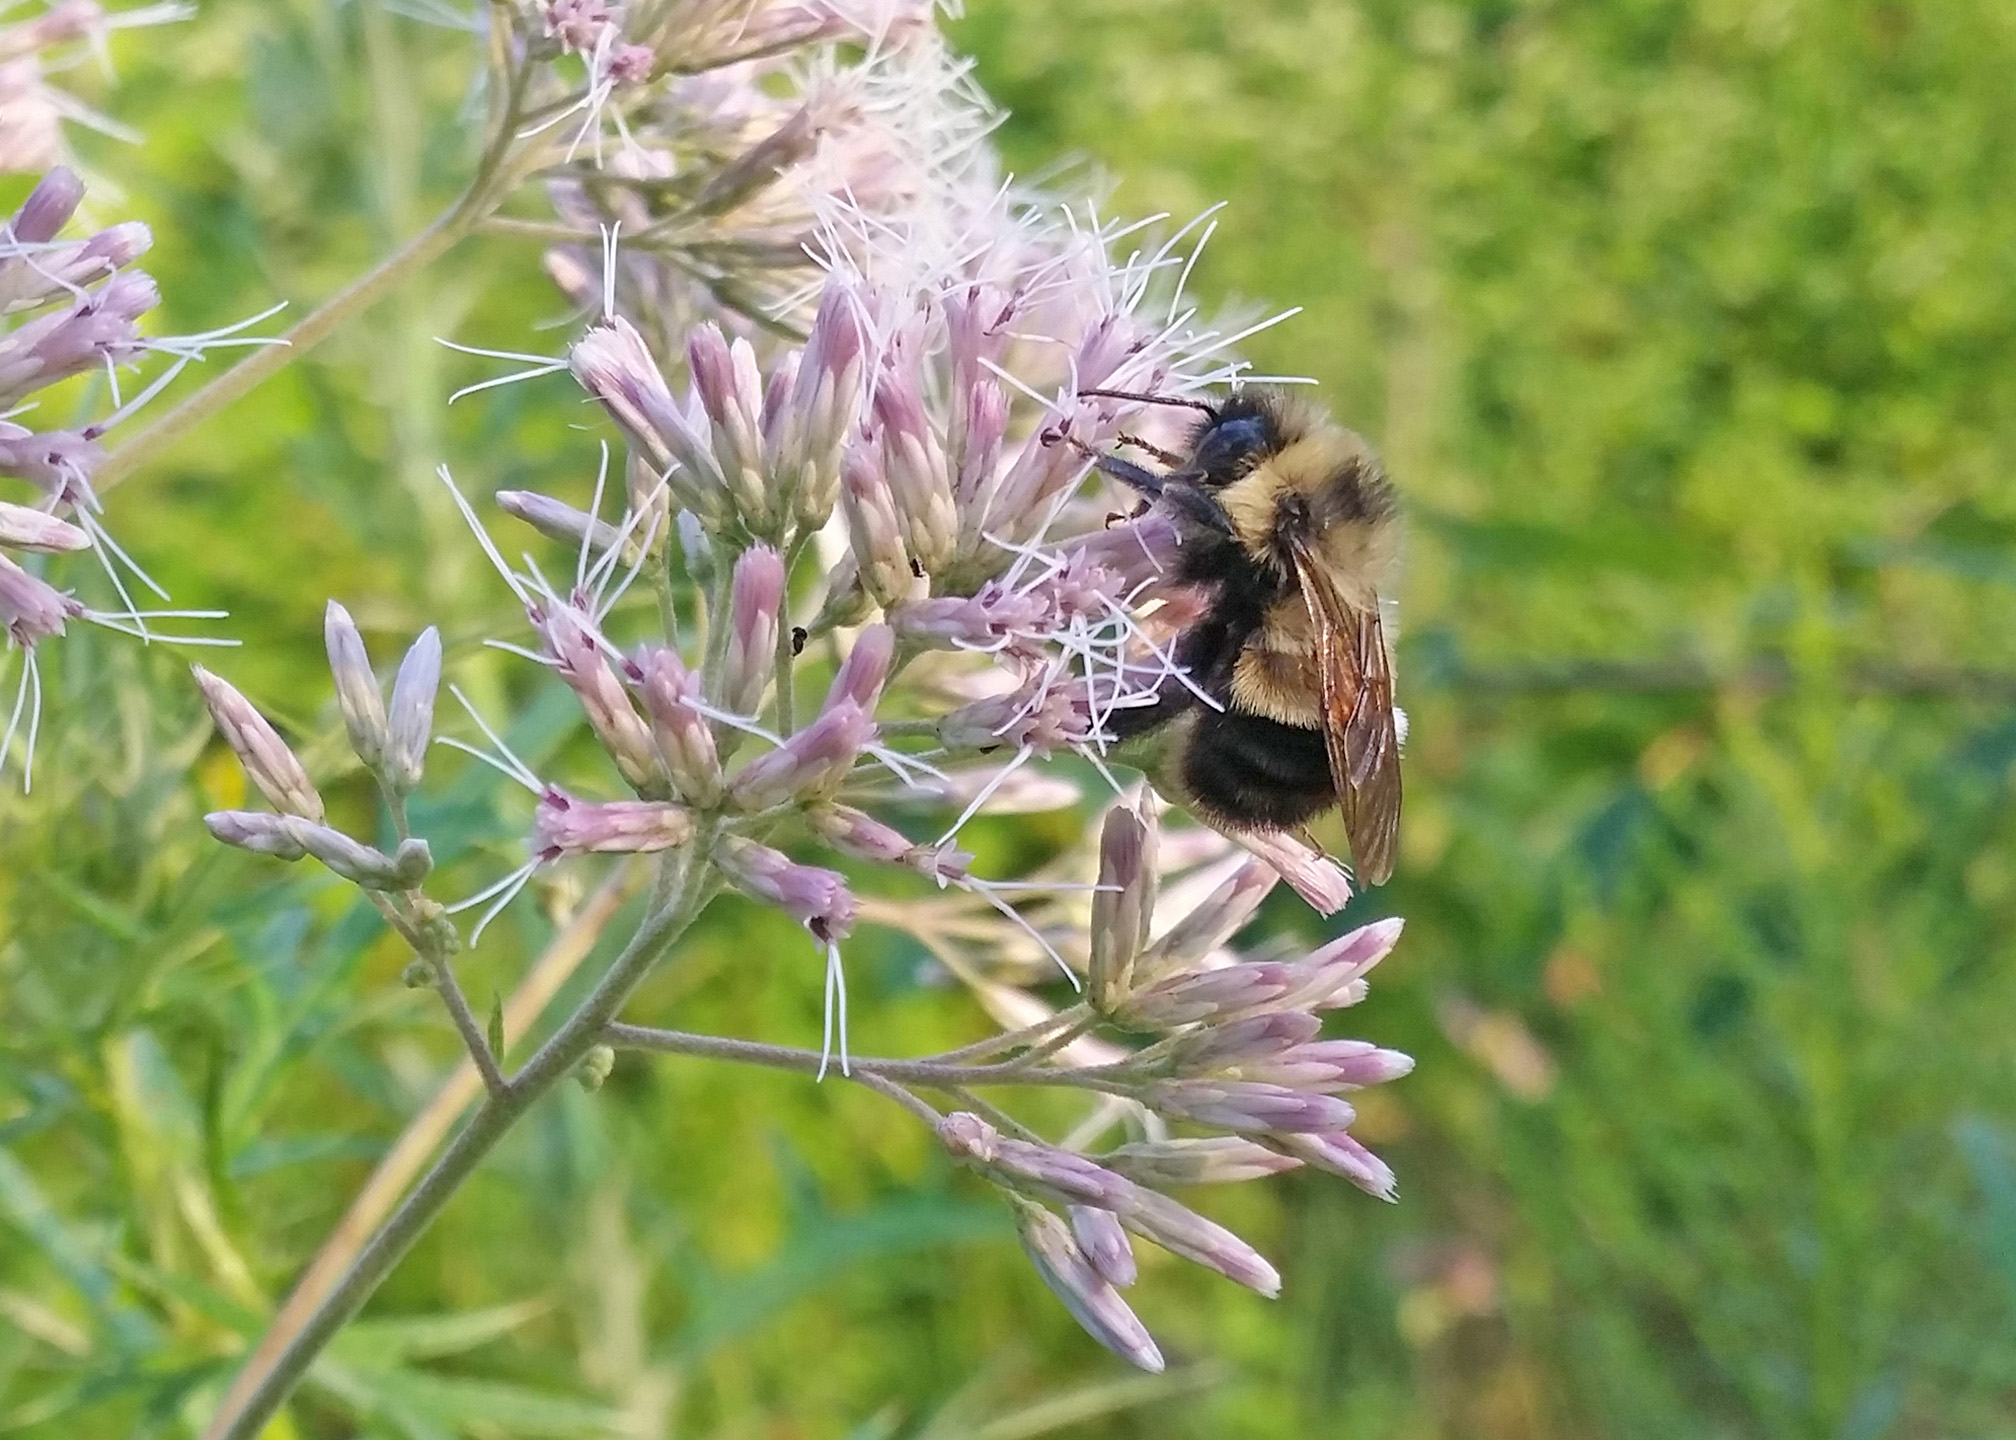 A yellow and black bumble bee with a rusty brown patch of color on its abdomen is drinking nectar from a narrow pink flower